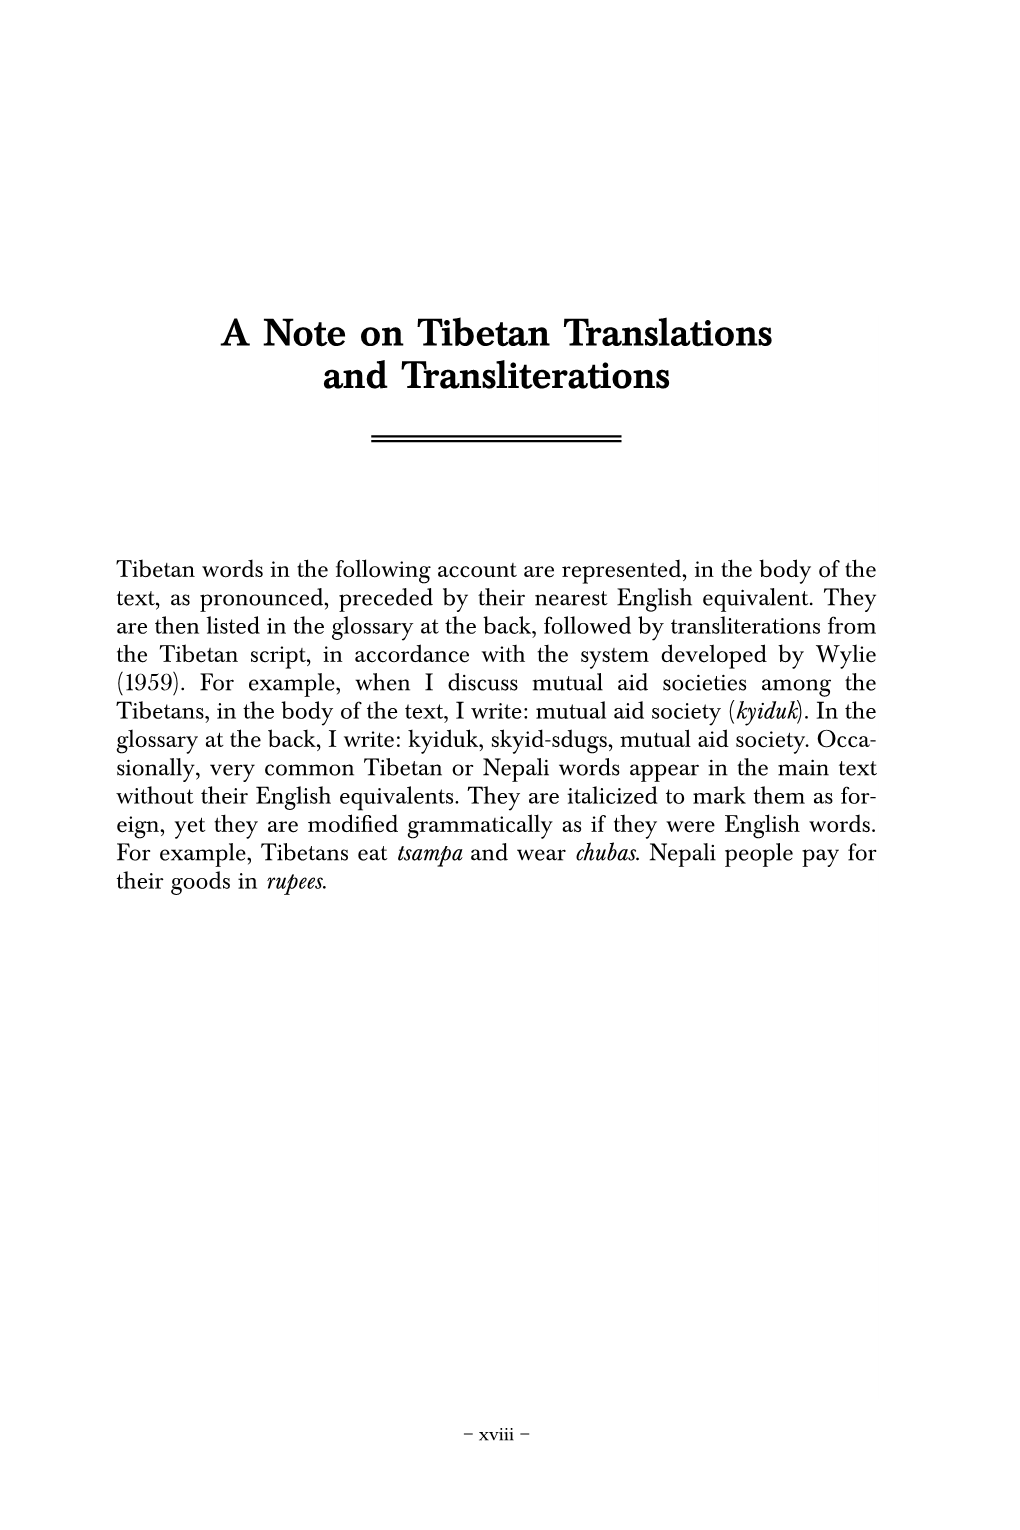 A Note on Tibetan Translations and Transliterations